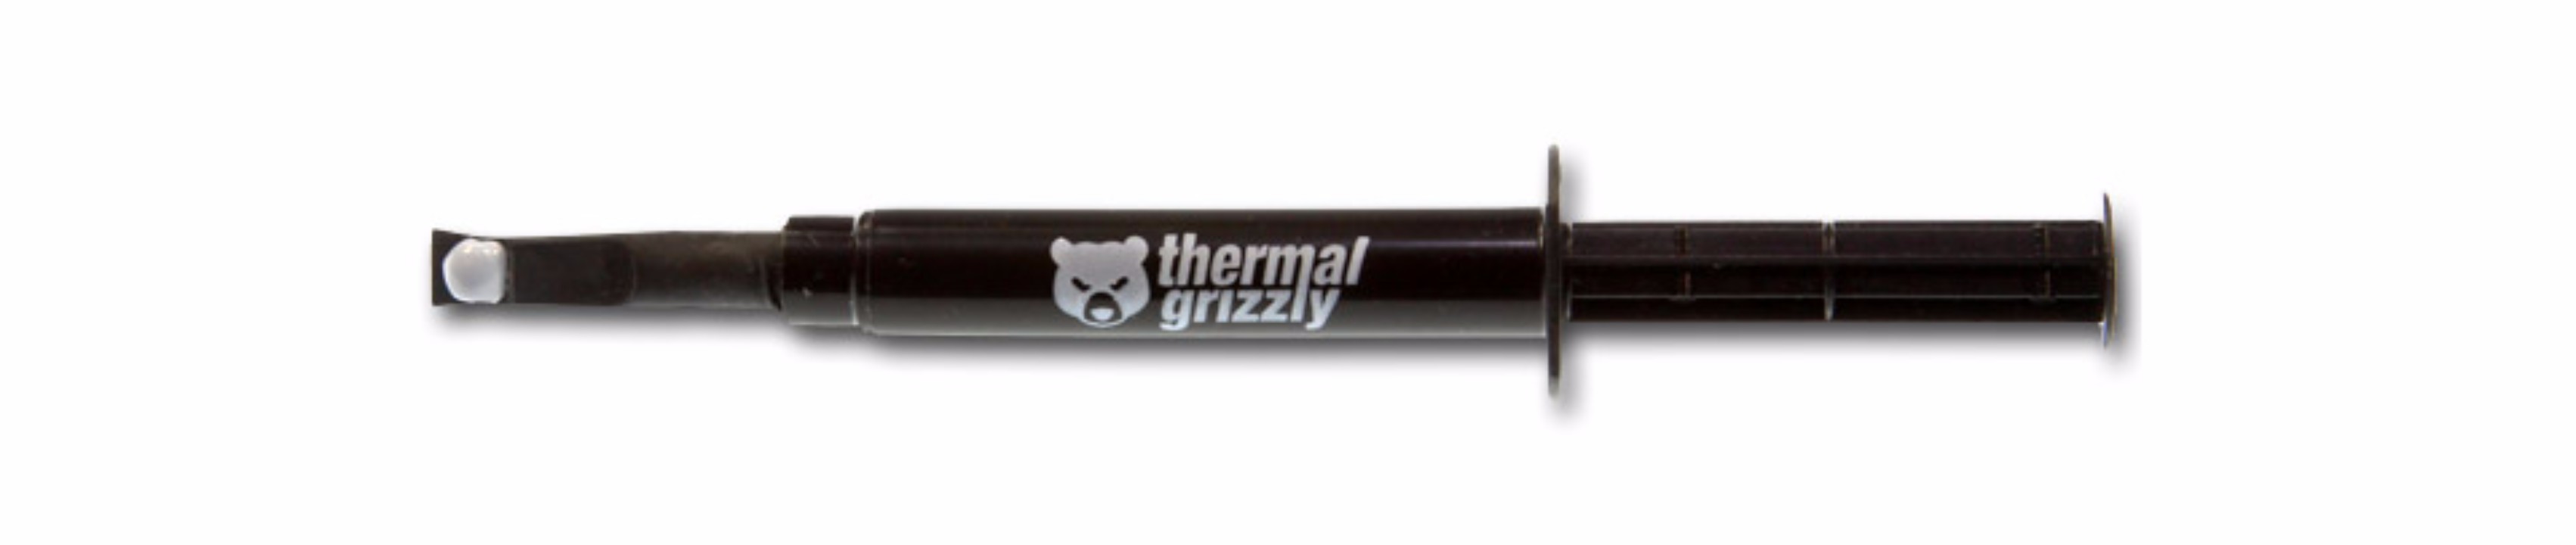 Pasta Térmica Thermal Grizzly Hydronaut (7.8g)